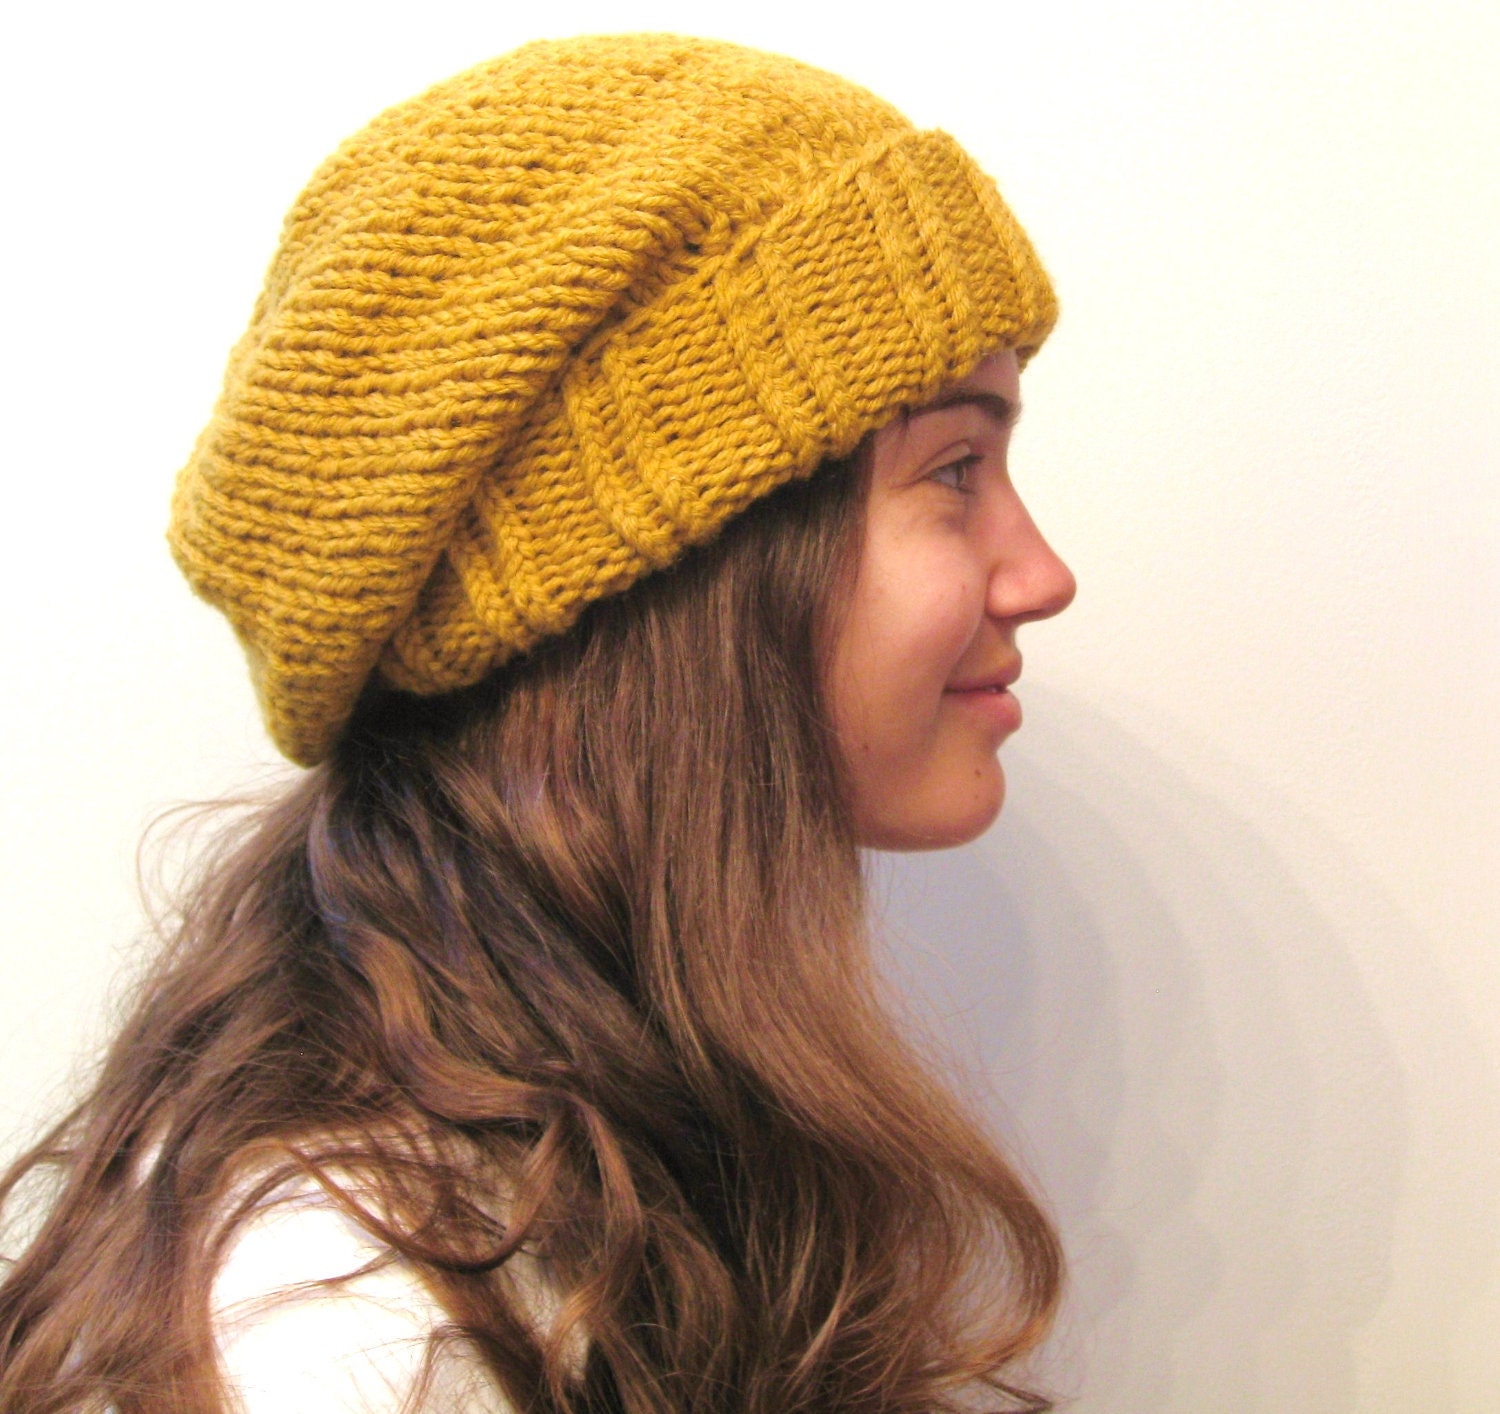 Winter Hat - Knit Hat - The Cuffed Slouch Hat - Wool Blend - Mustard - meganEsass